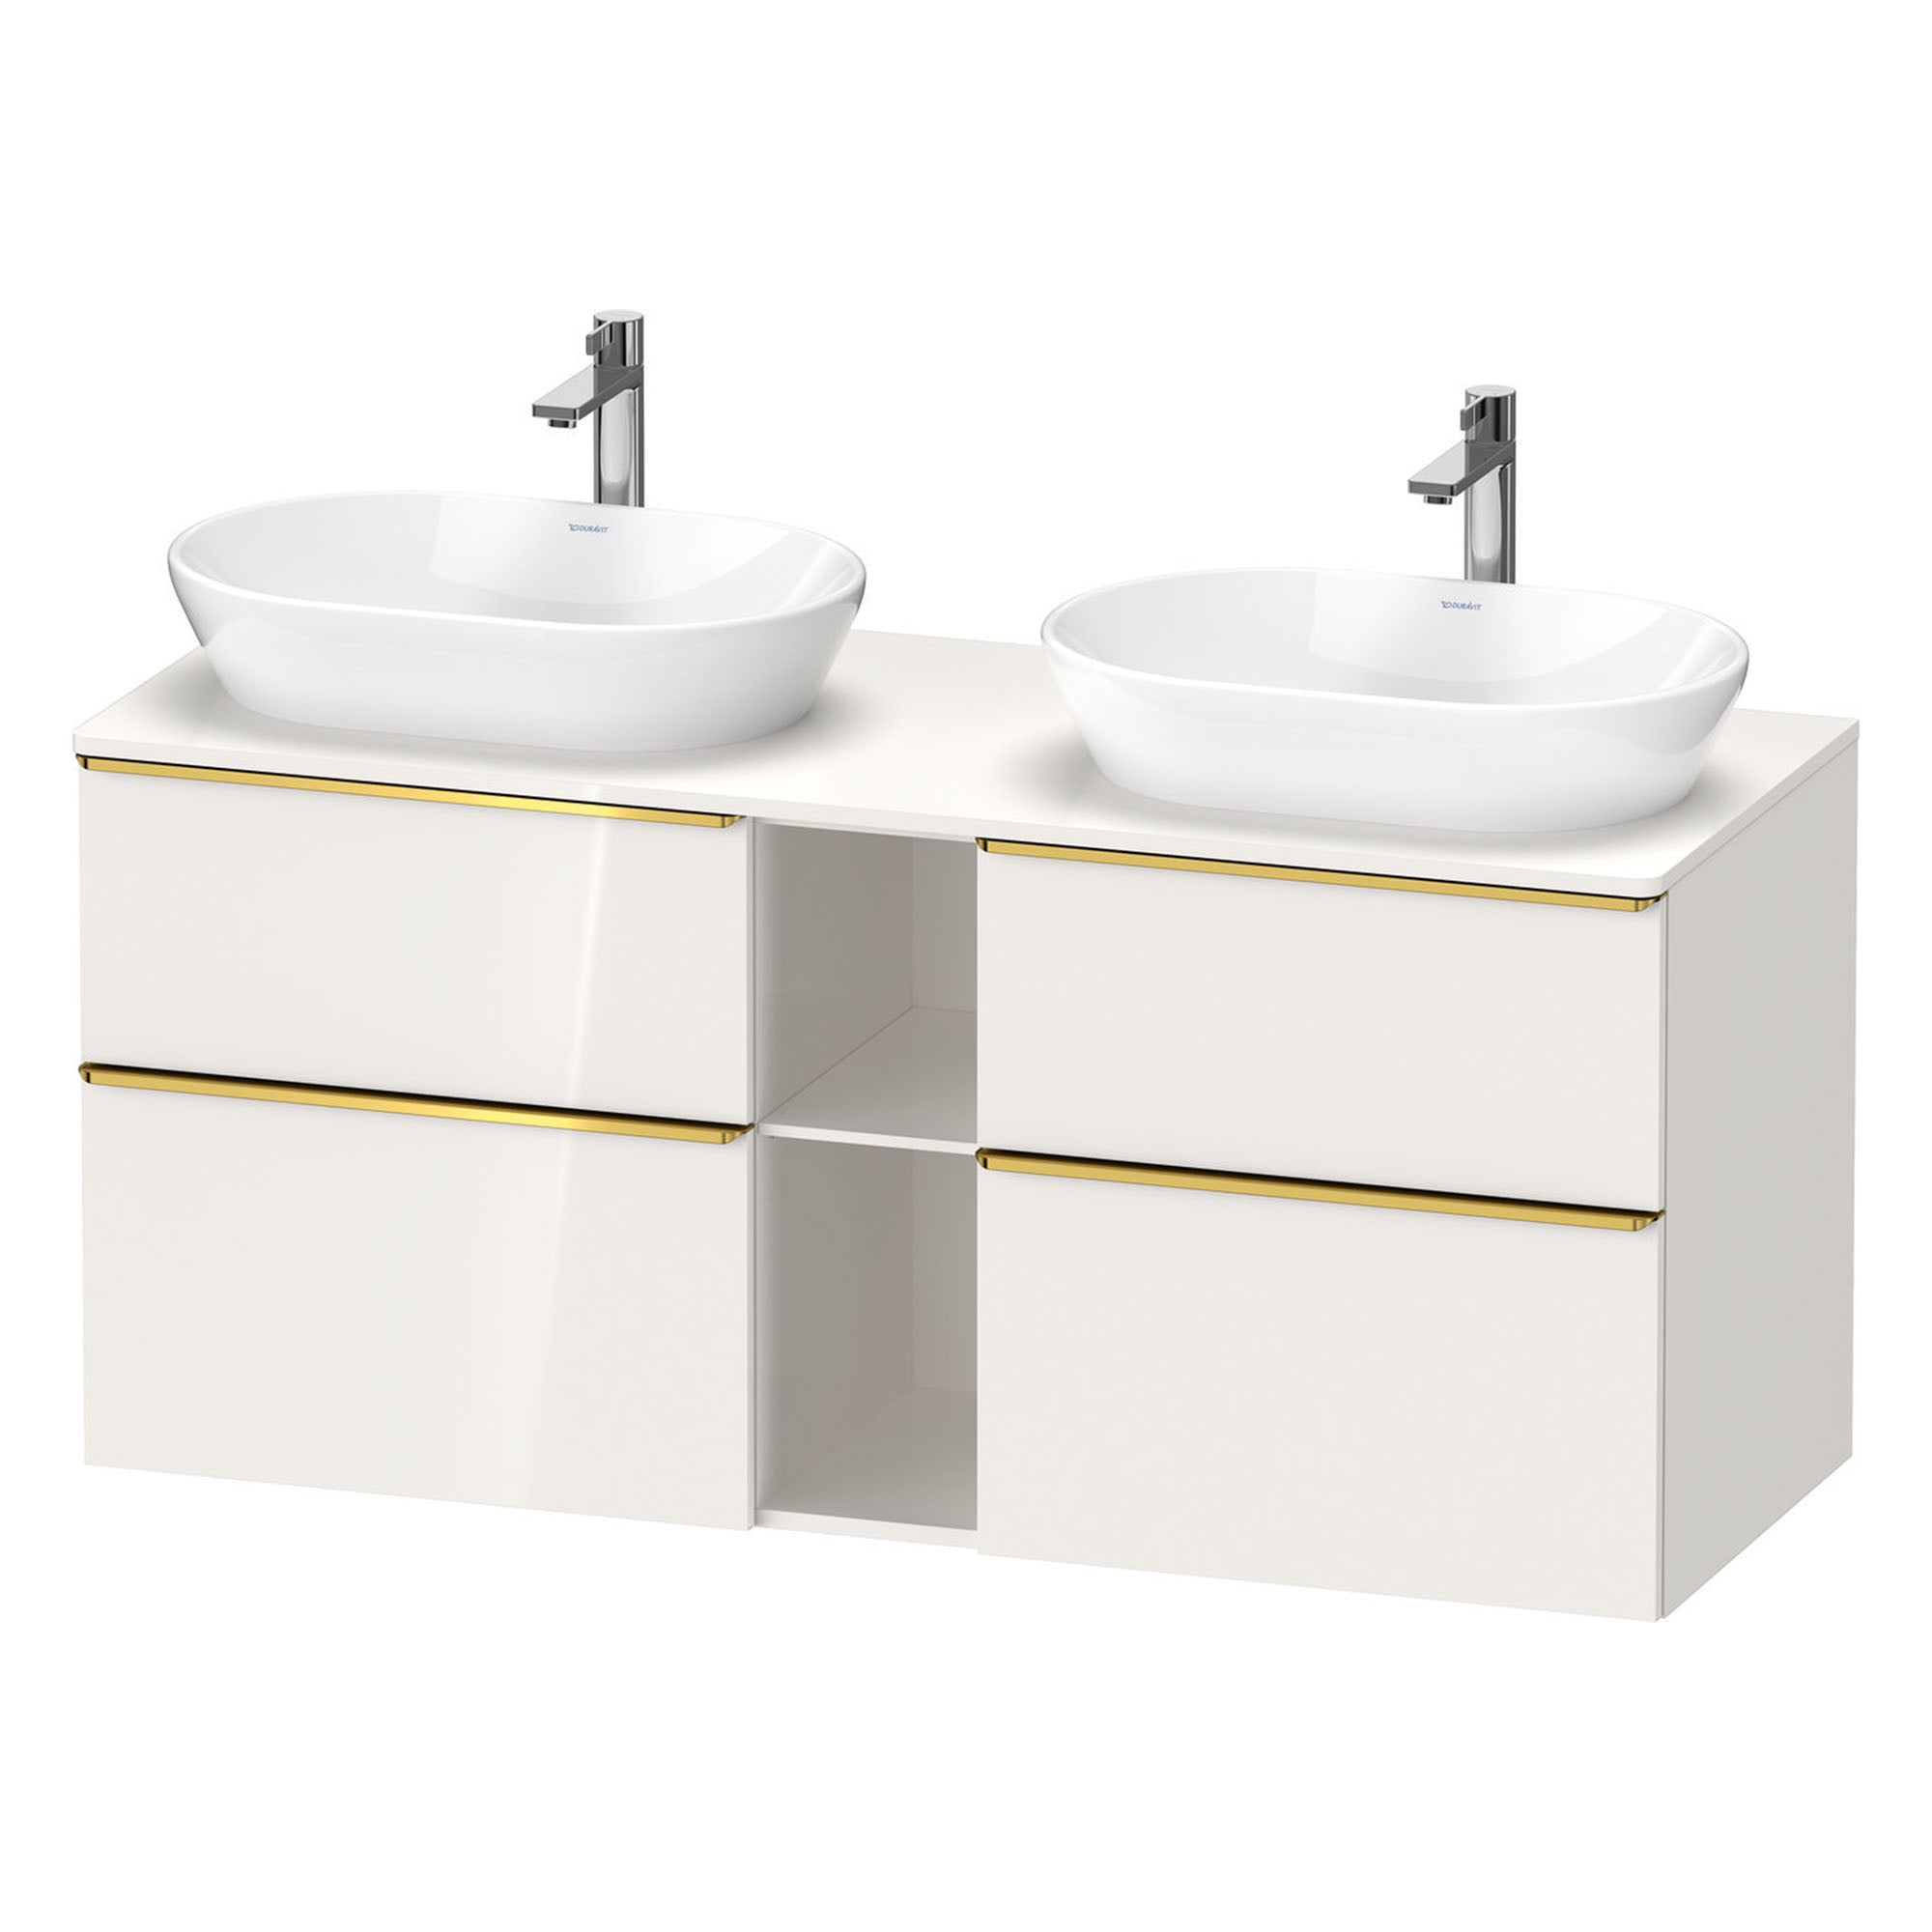 duravit d-neo 1400 wall mounted vanity unit with worktop 2 open shelves white gloss gold handles